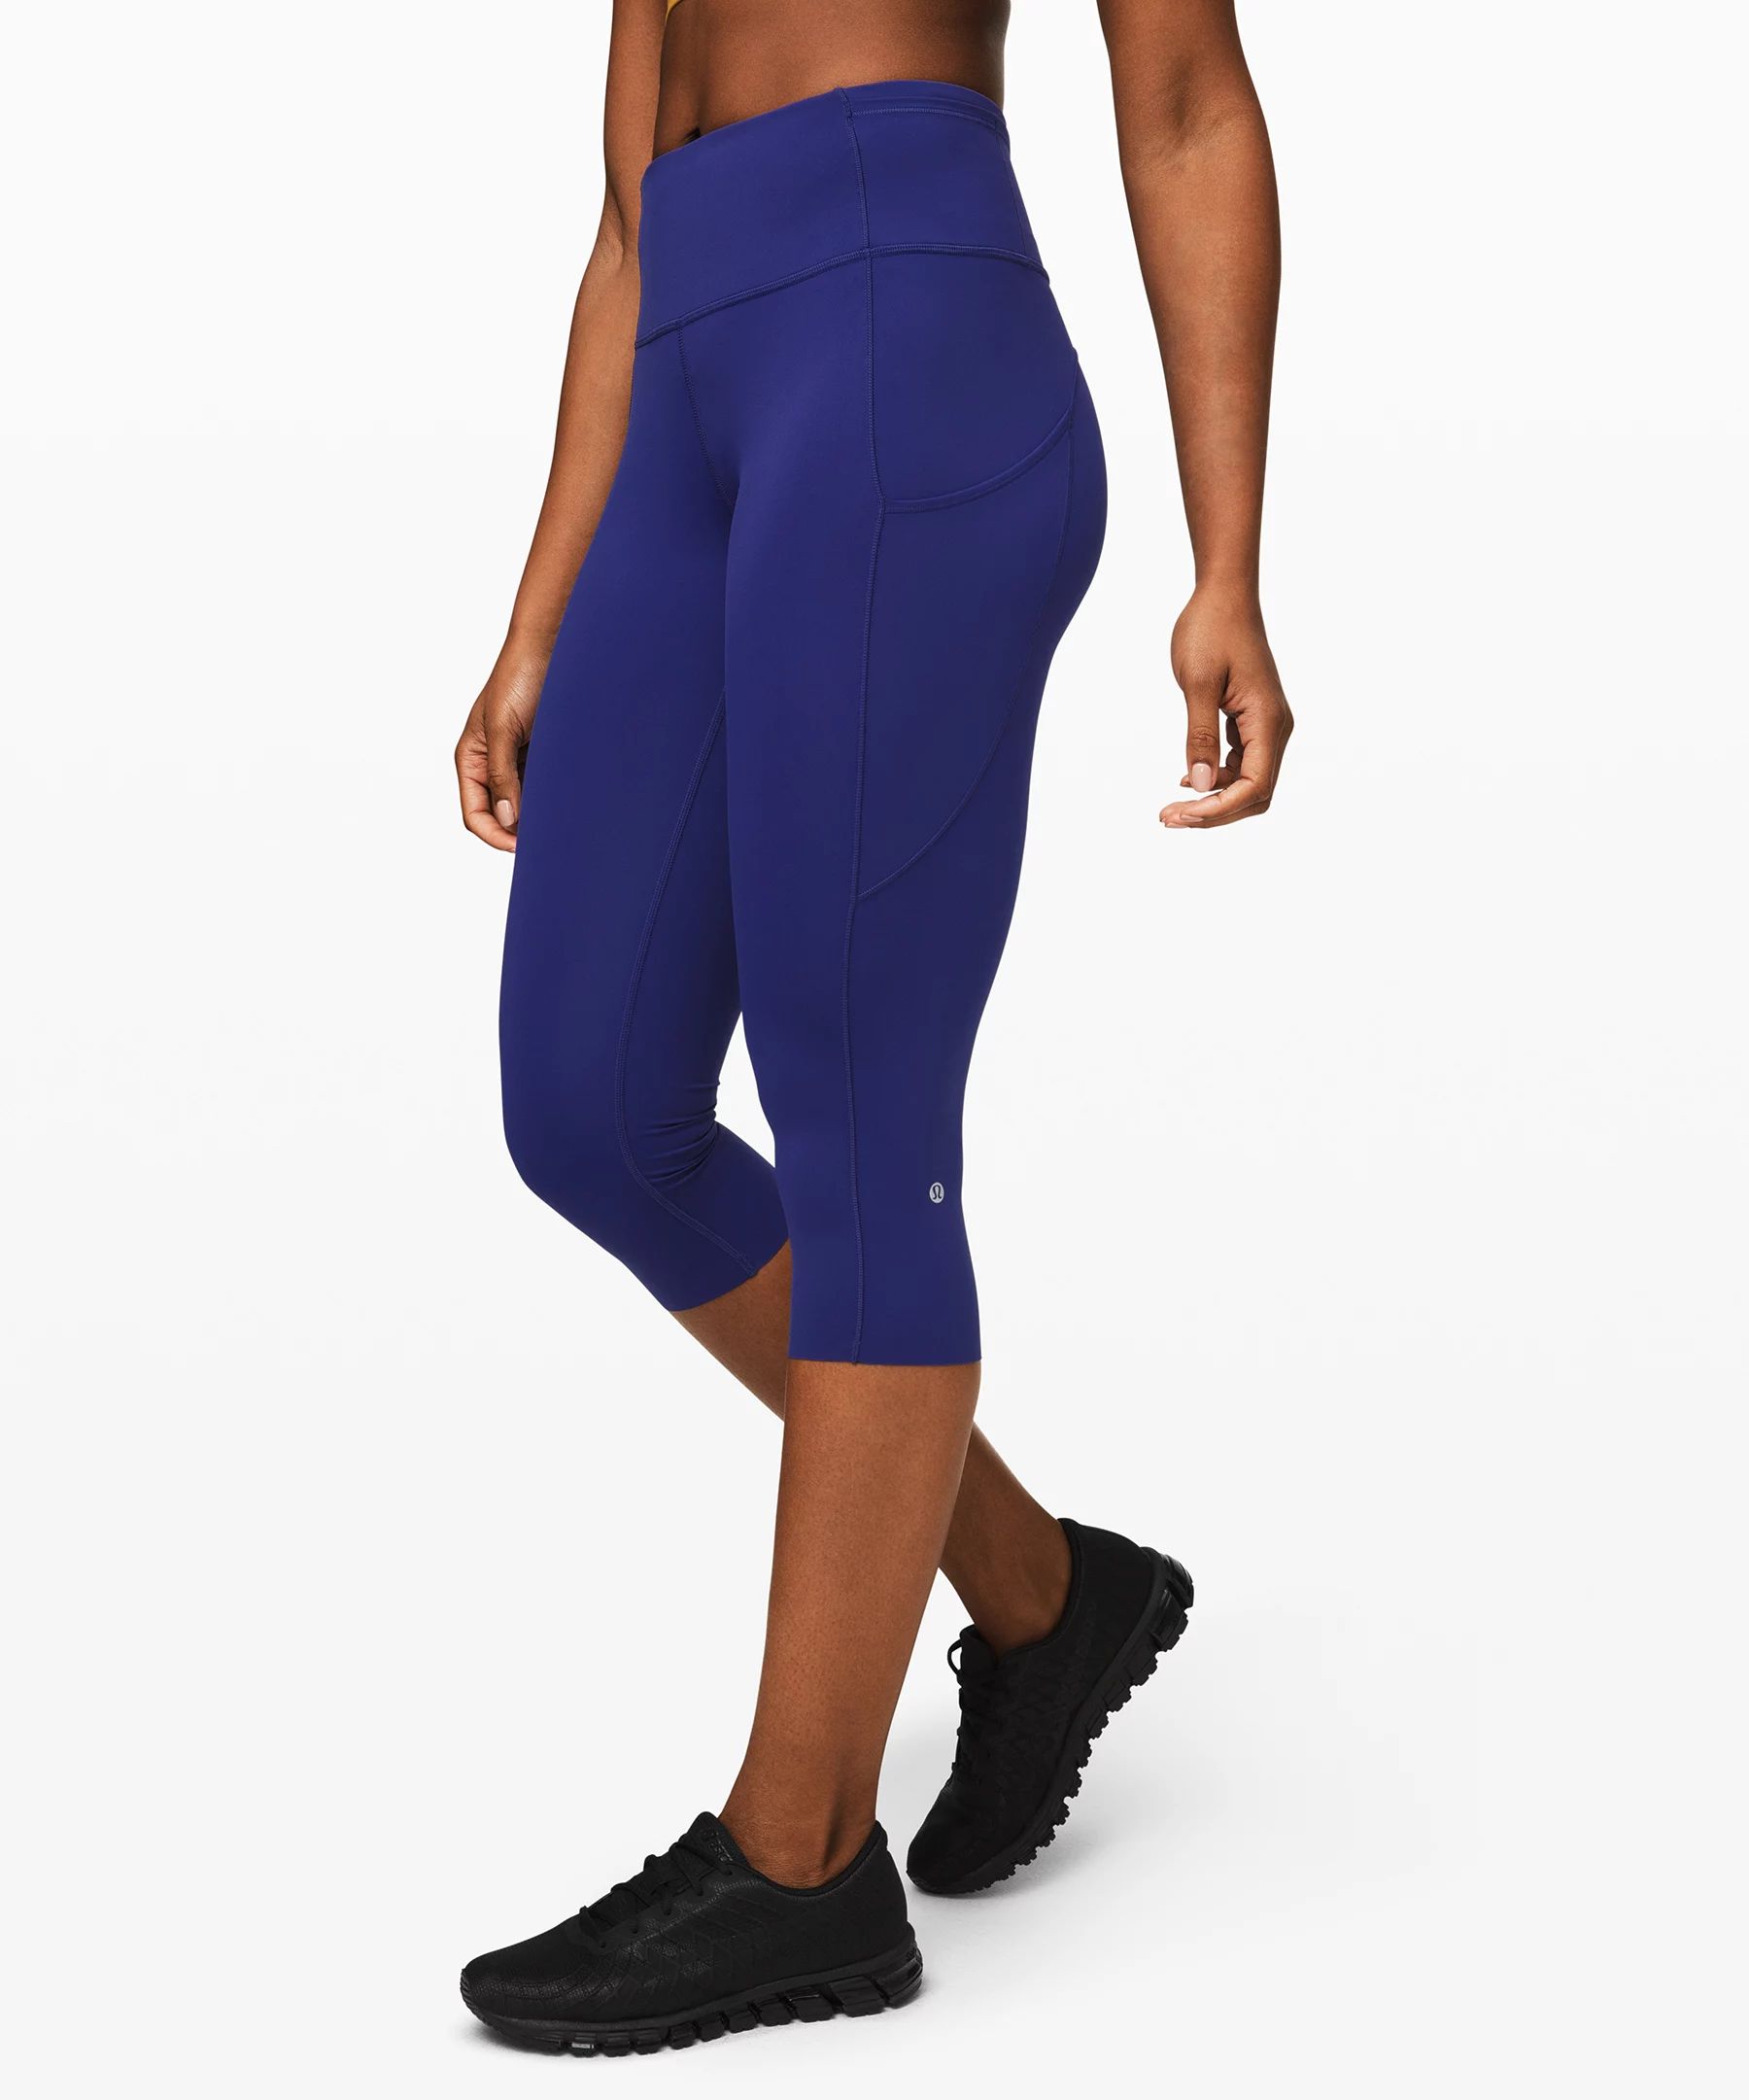 Fast and Free Crop II 19" Non-Reflective | Lululemon (US)